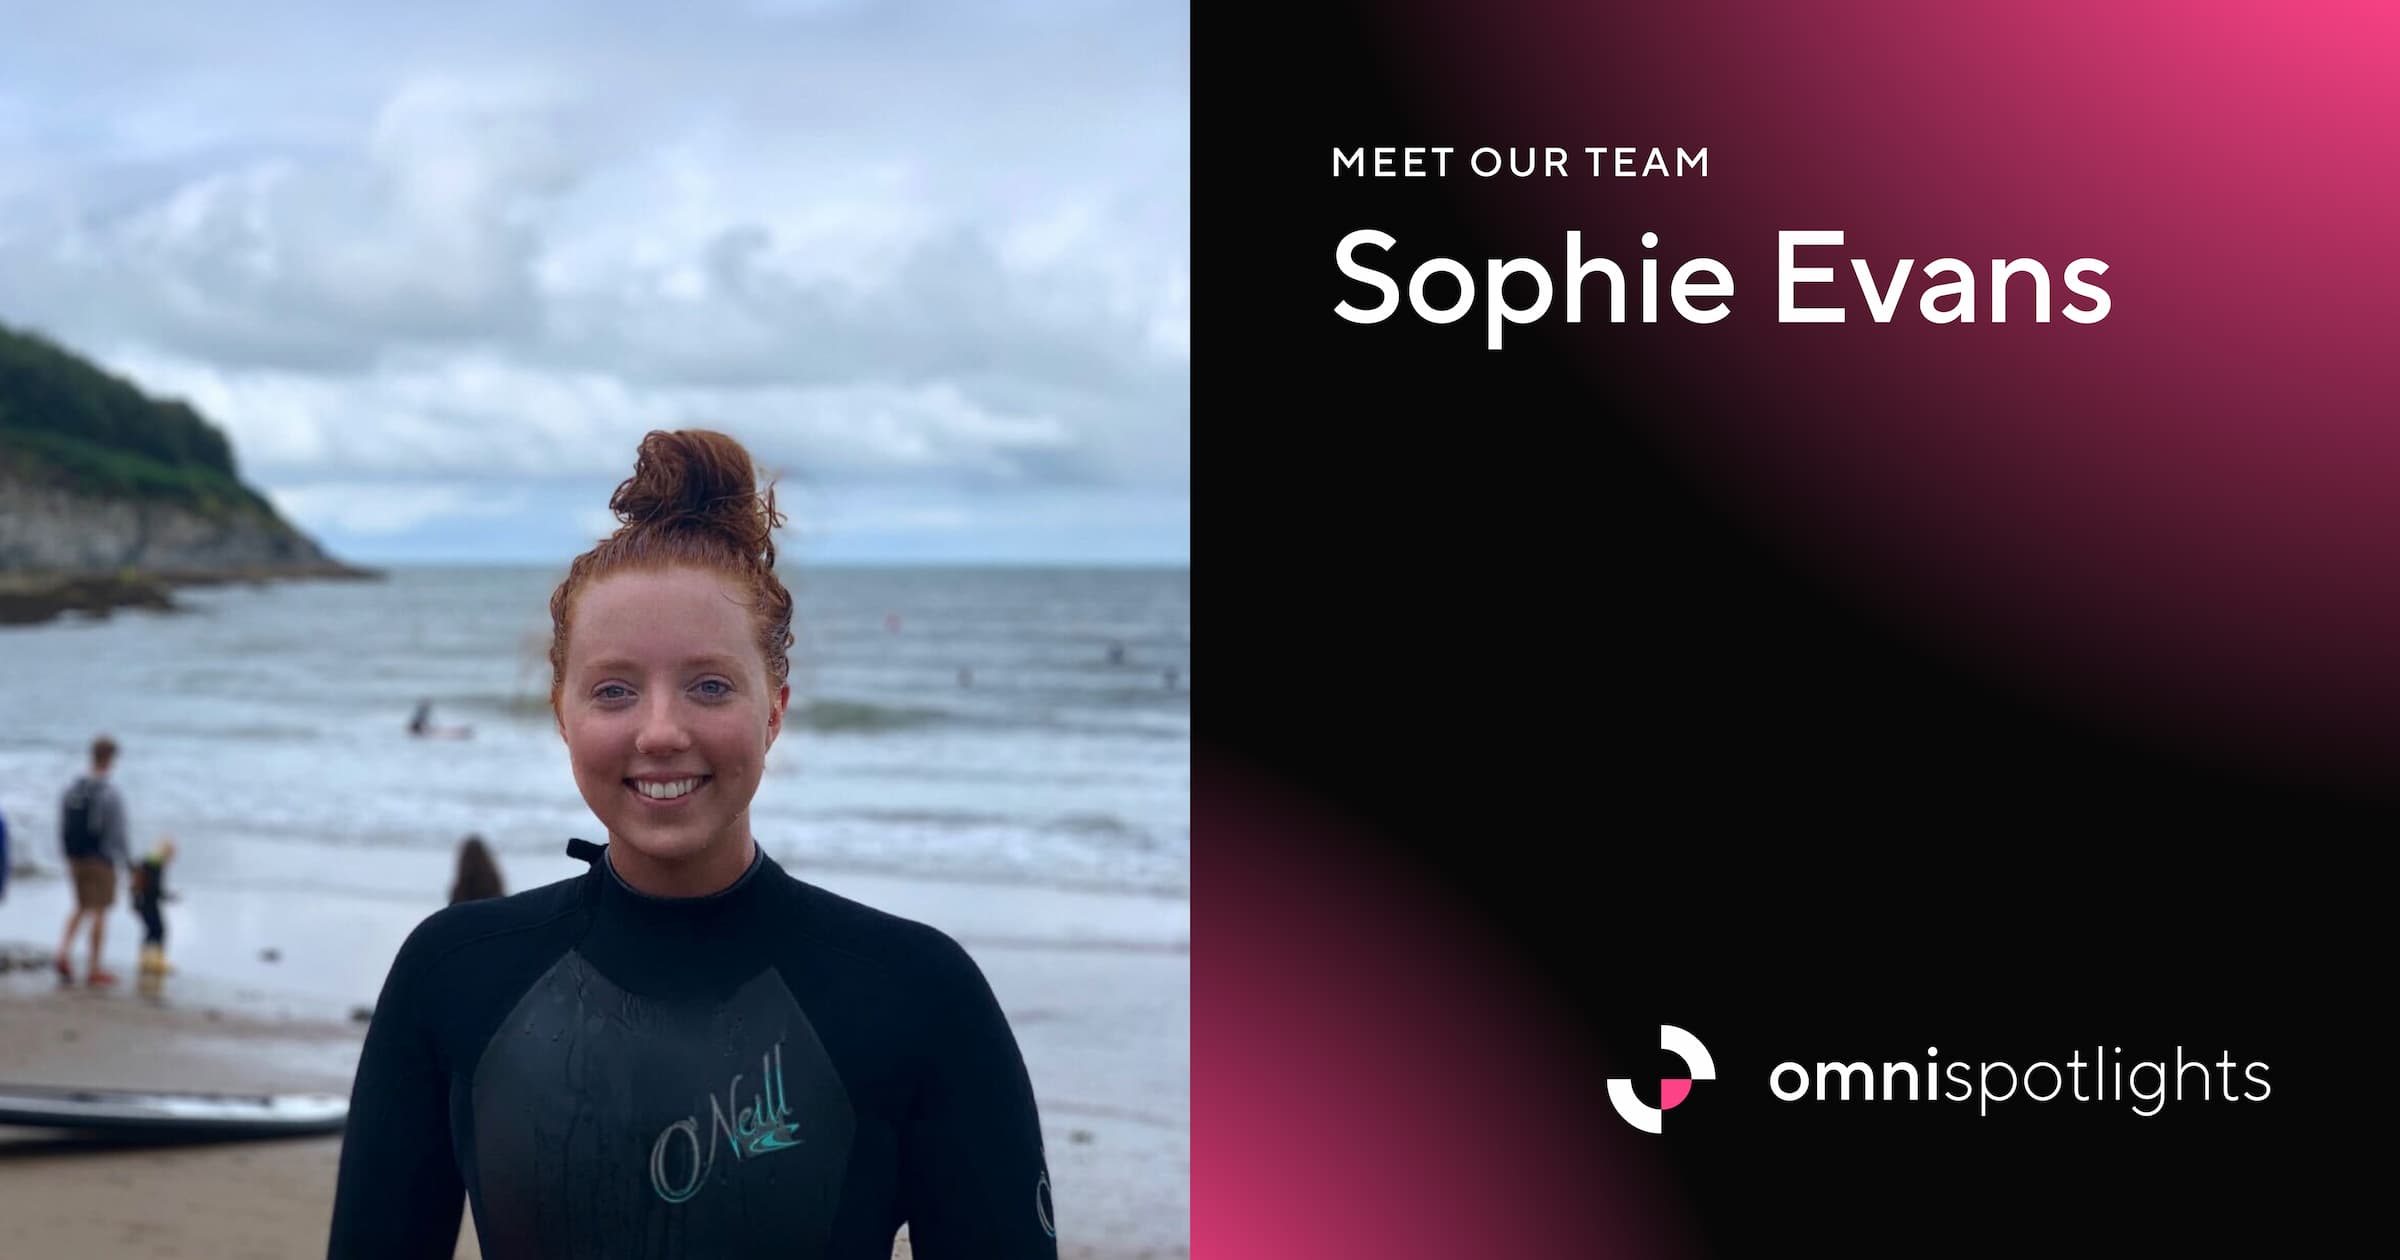 Photo of Sophie in a wetsuit at the beach next to text reading 